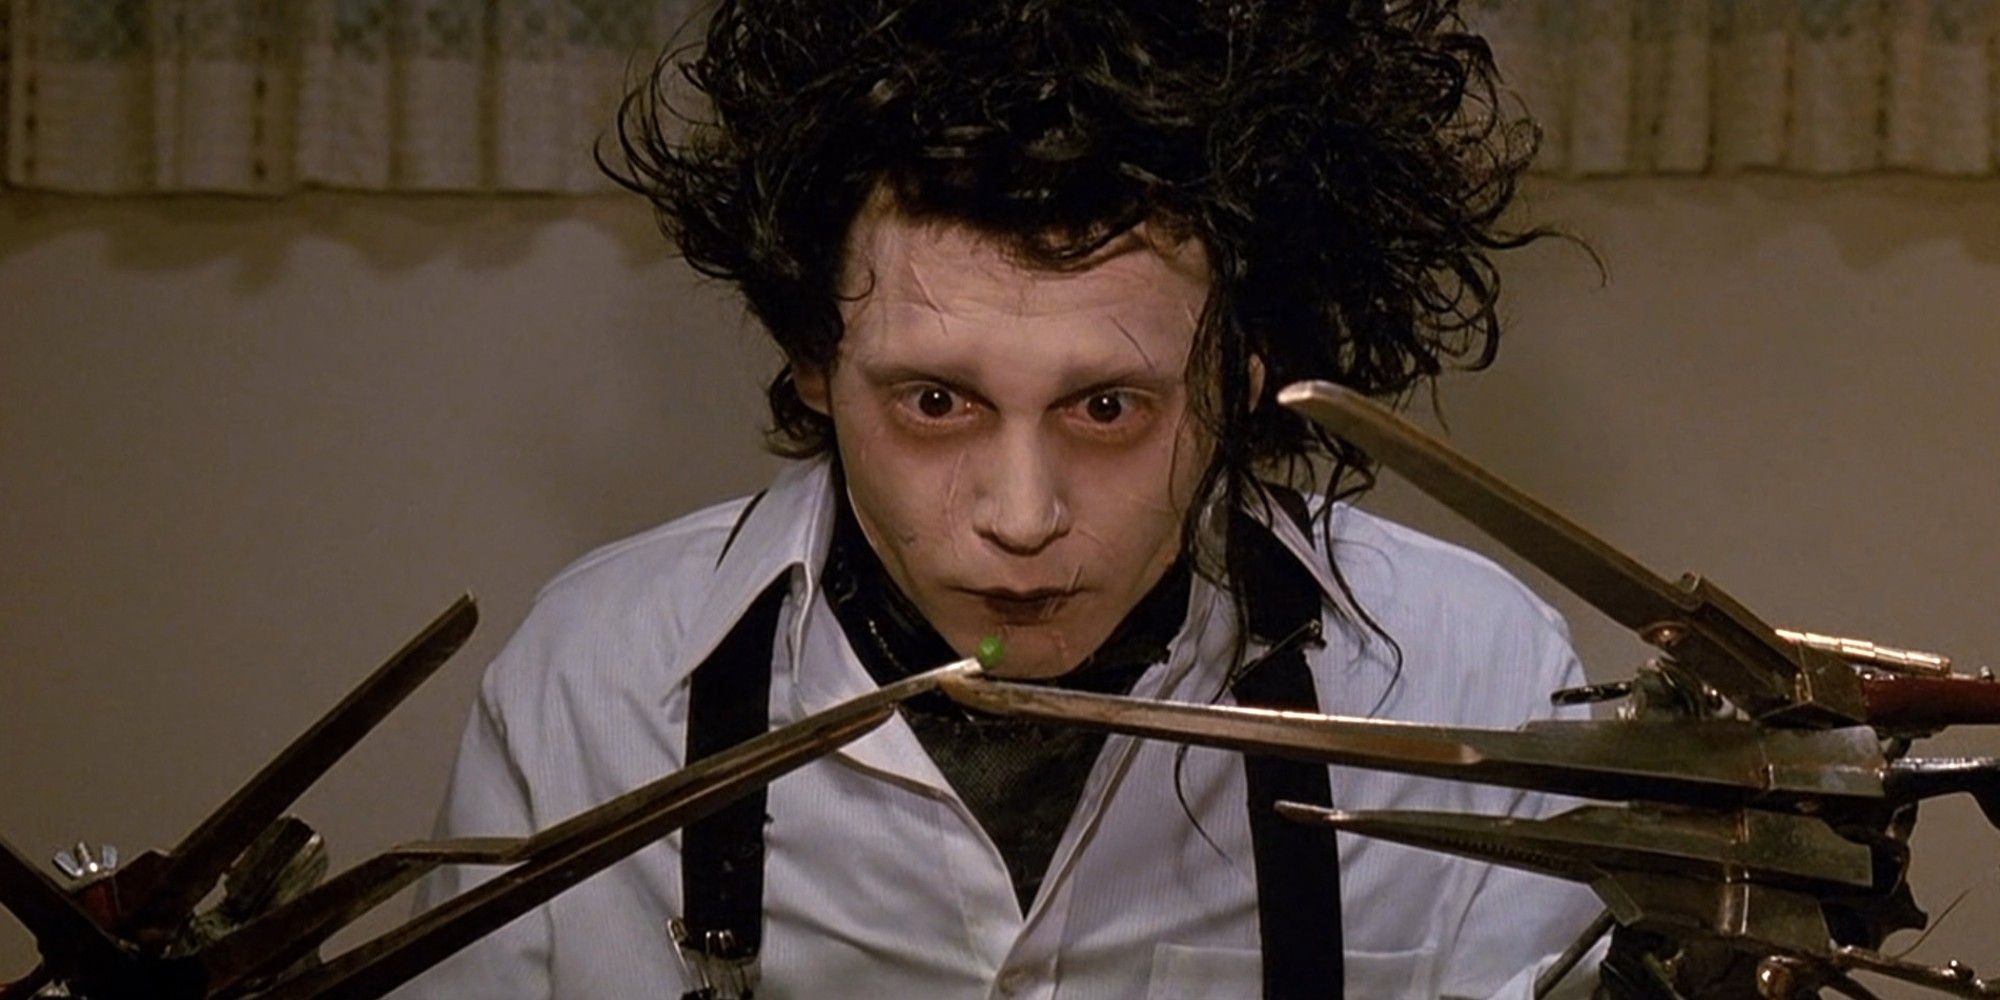 Johnny Depp trying to eat a pea in Edward Scissorhands